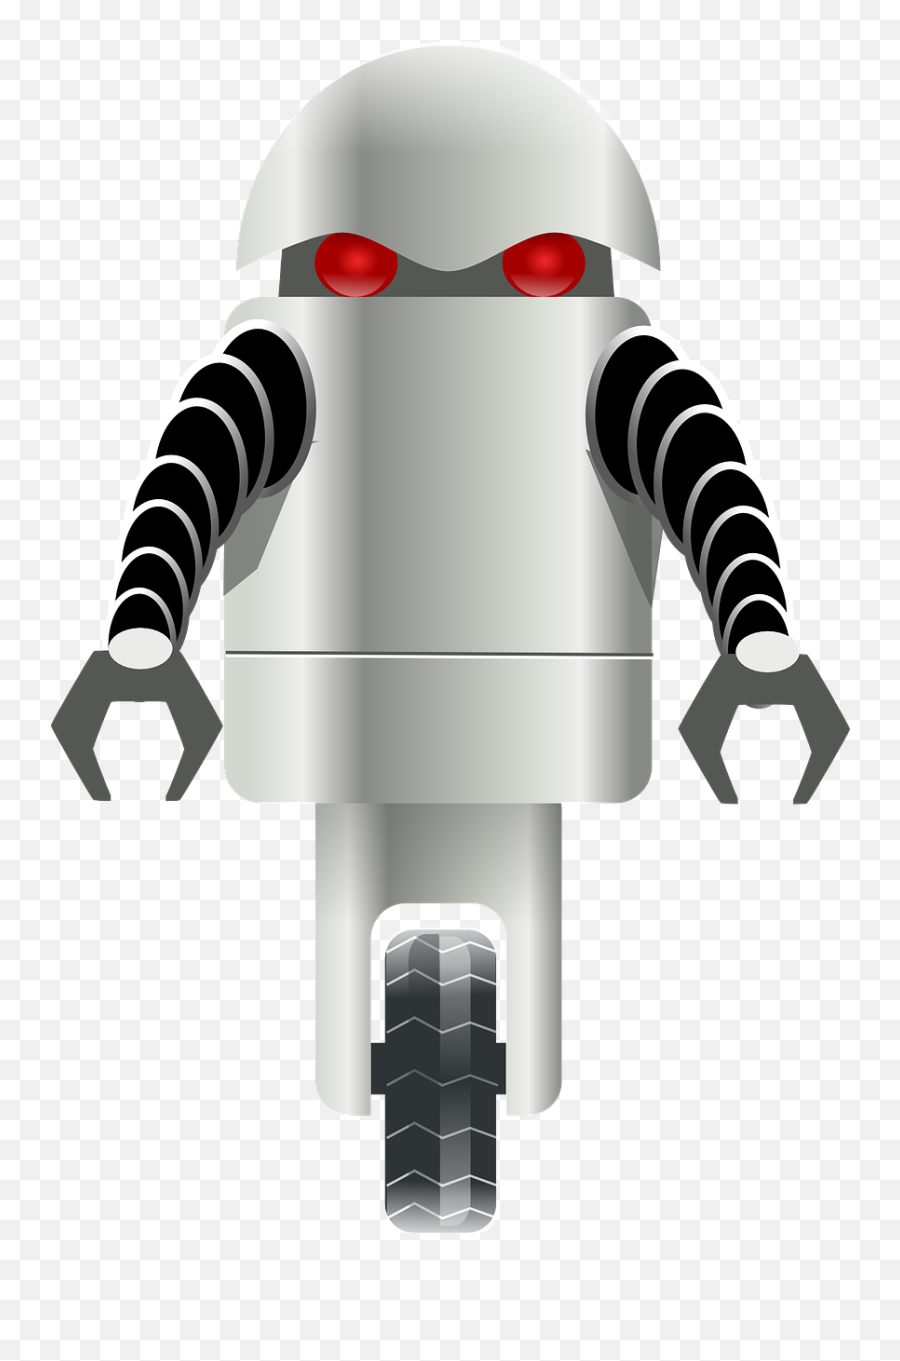 Robot Machine Electronics Factory - Robot With One Wheel Emoji,Star Wars Emoji For Android